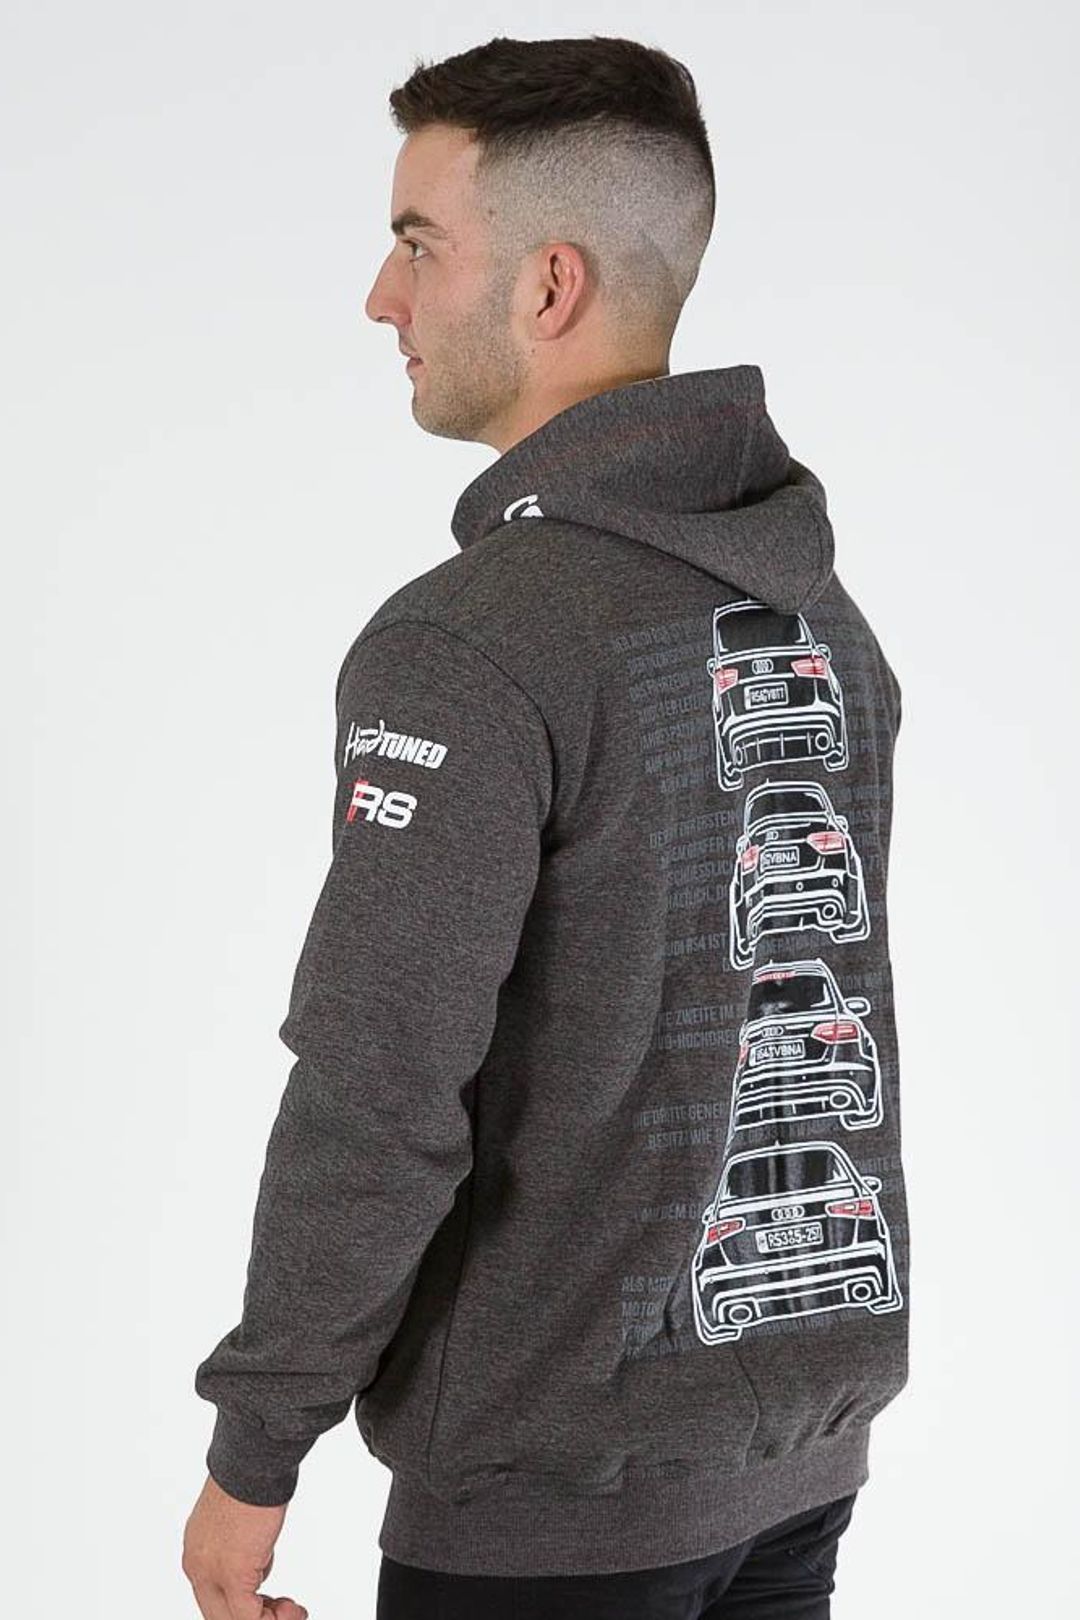 HARDTUNED - AUDI RS3, RS4, RS5 & RS6 ZIP-Hoodie - Grey